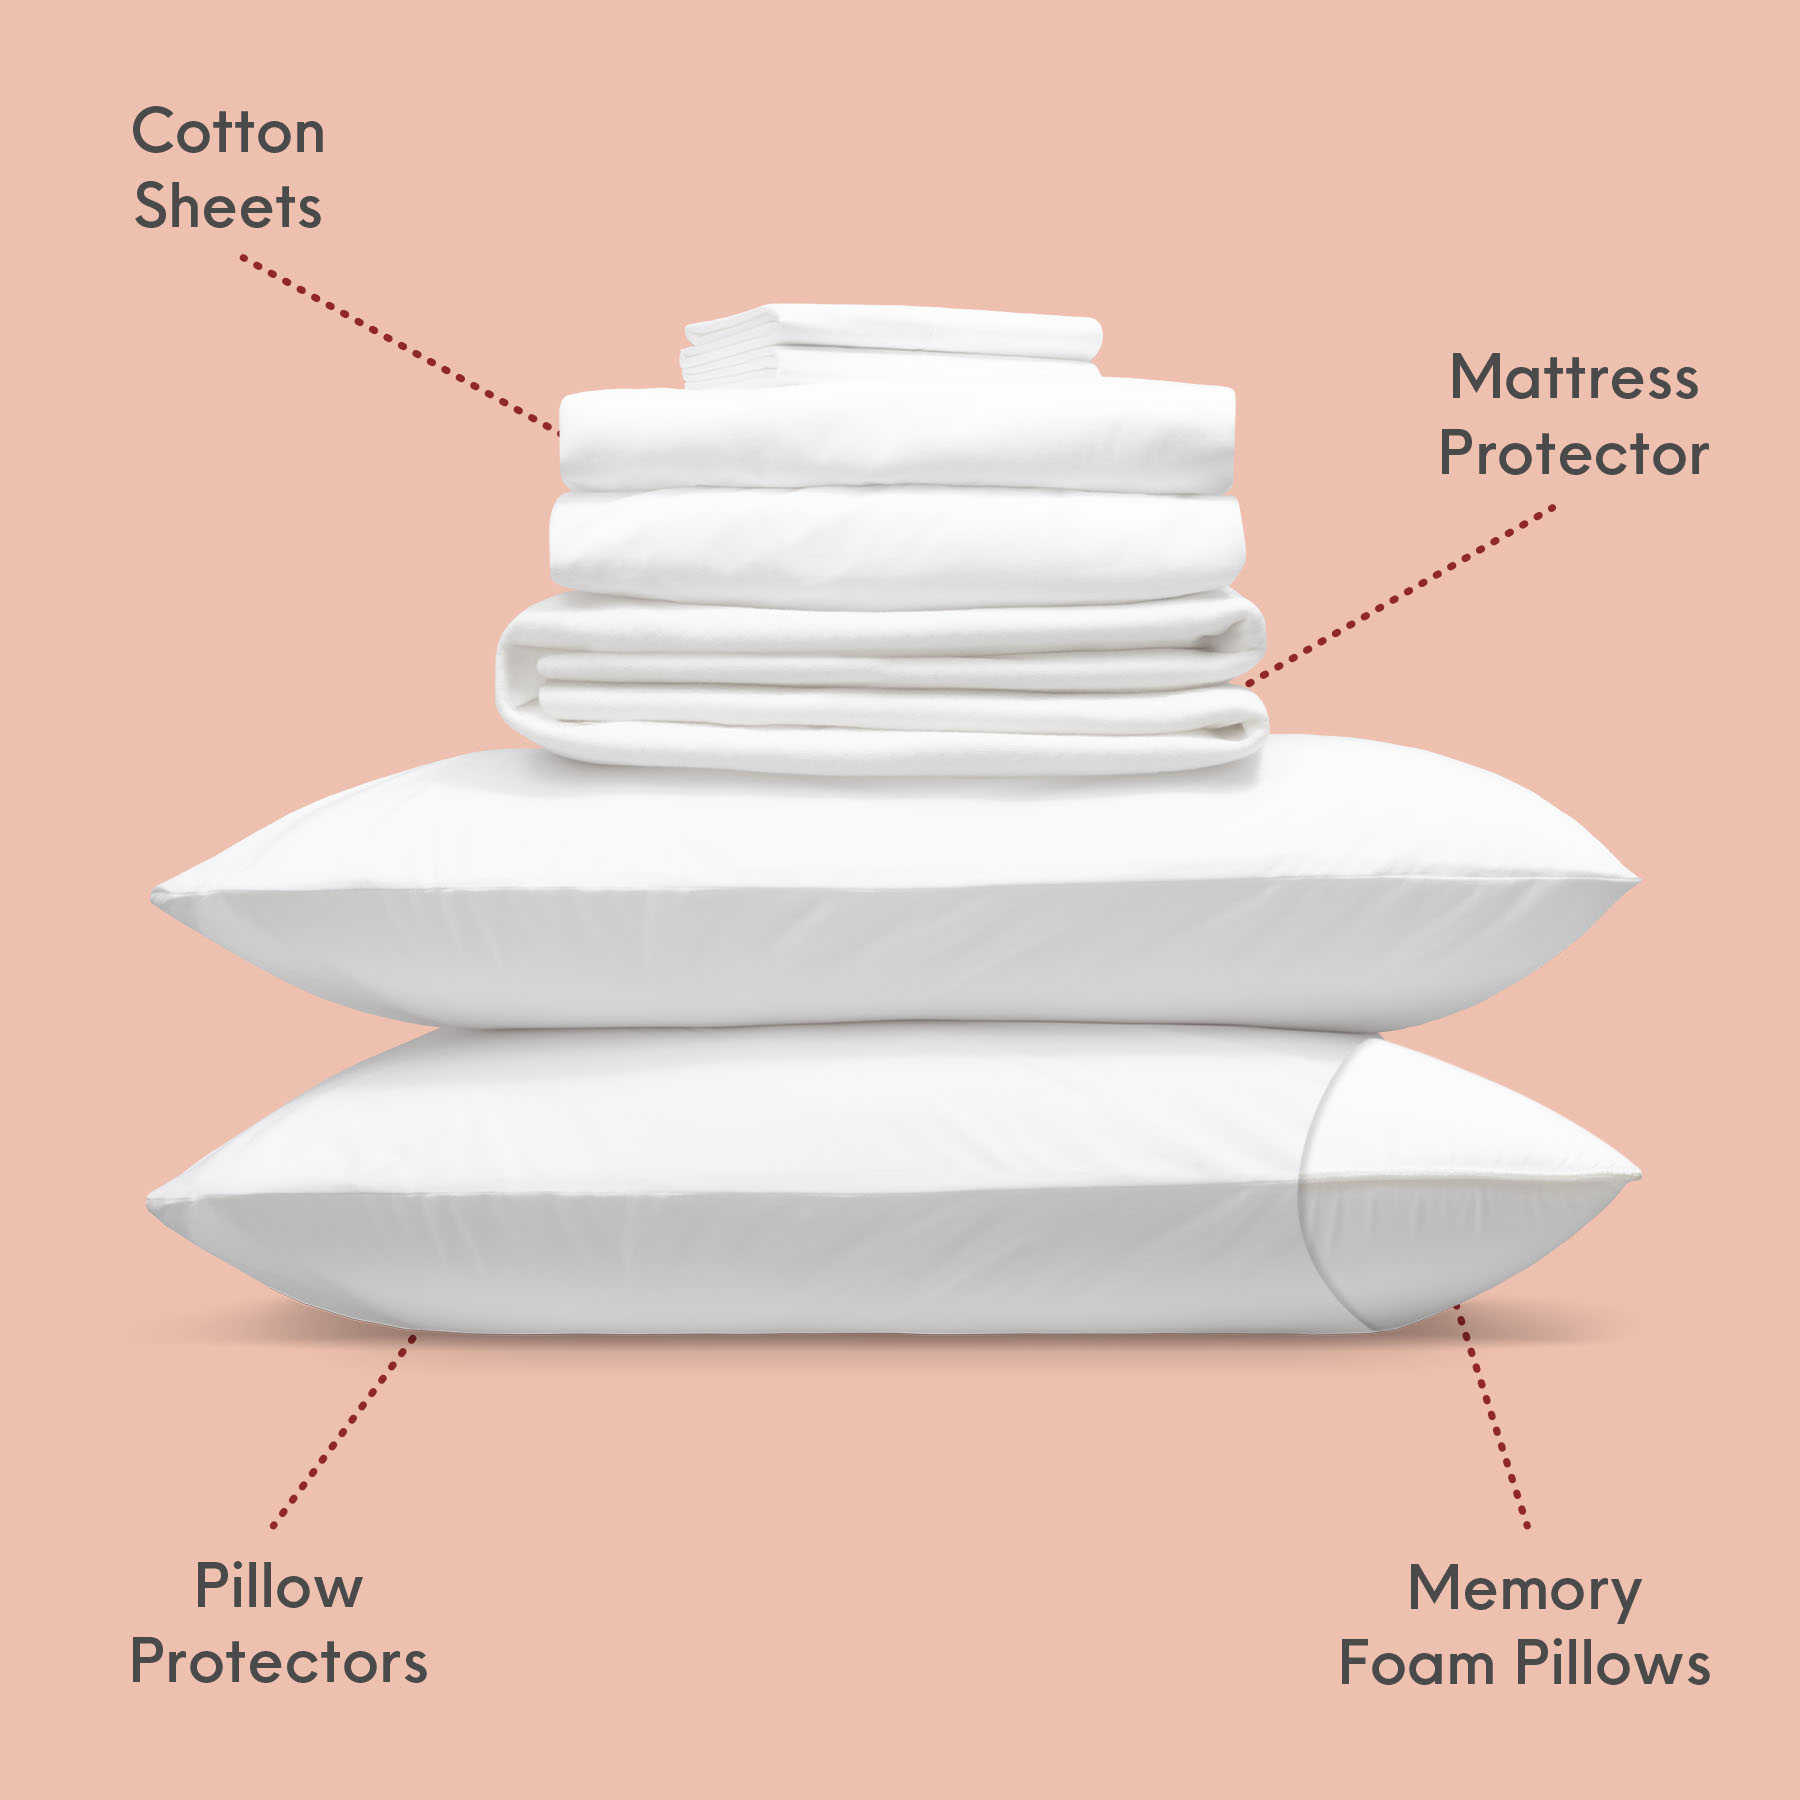 Free Comfort bundle includes sheets, pillows, mattress protector and pillow protectors